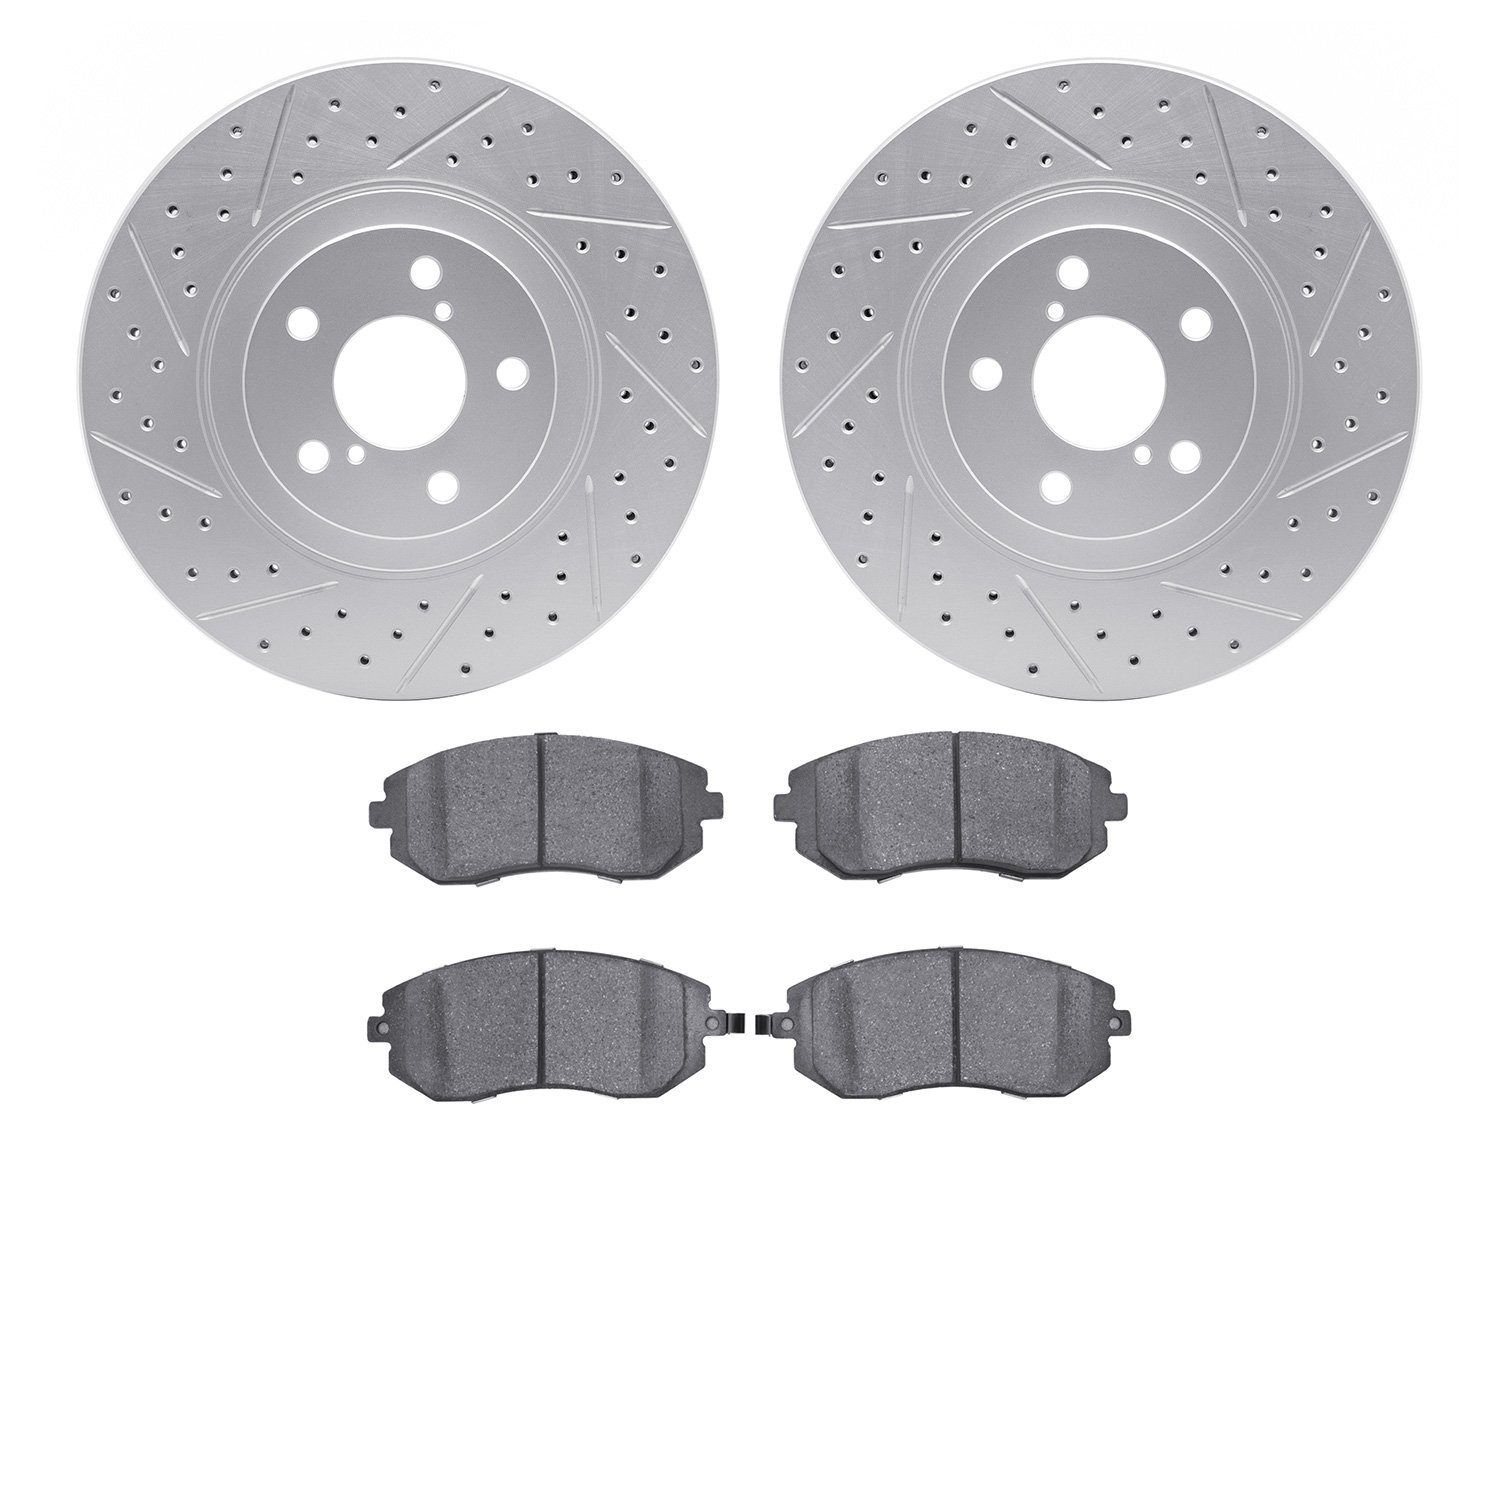 2502-13032 Geoperformance Drilled/Slotted Rotors w/5000 Advanced Brake Pads Kit, 2004-2012 Subaru, Position: Front